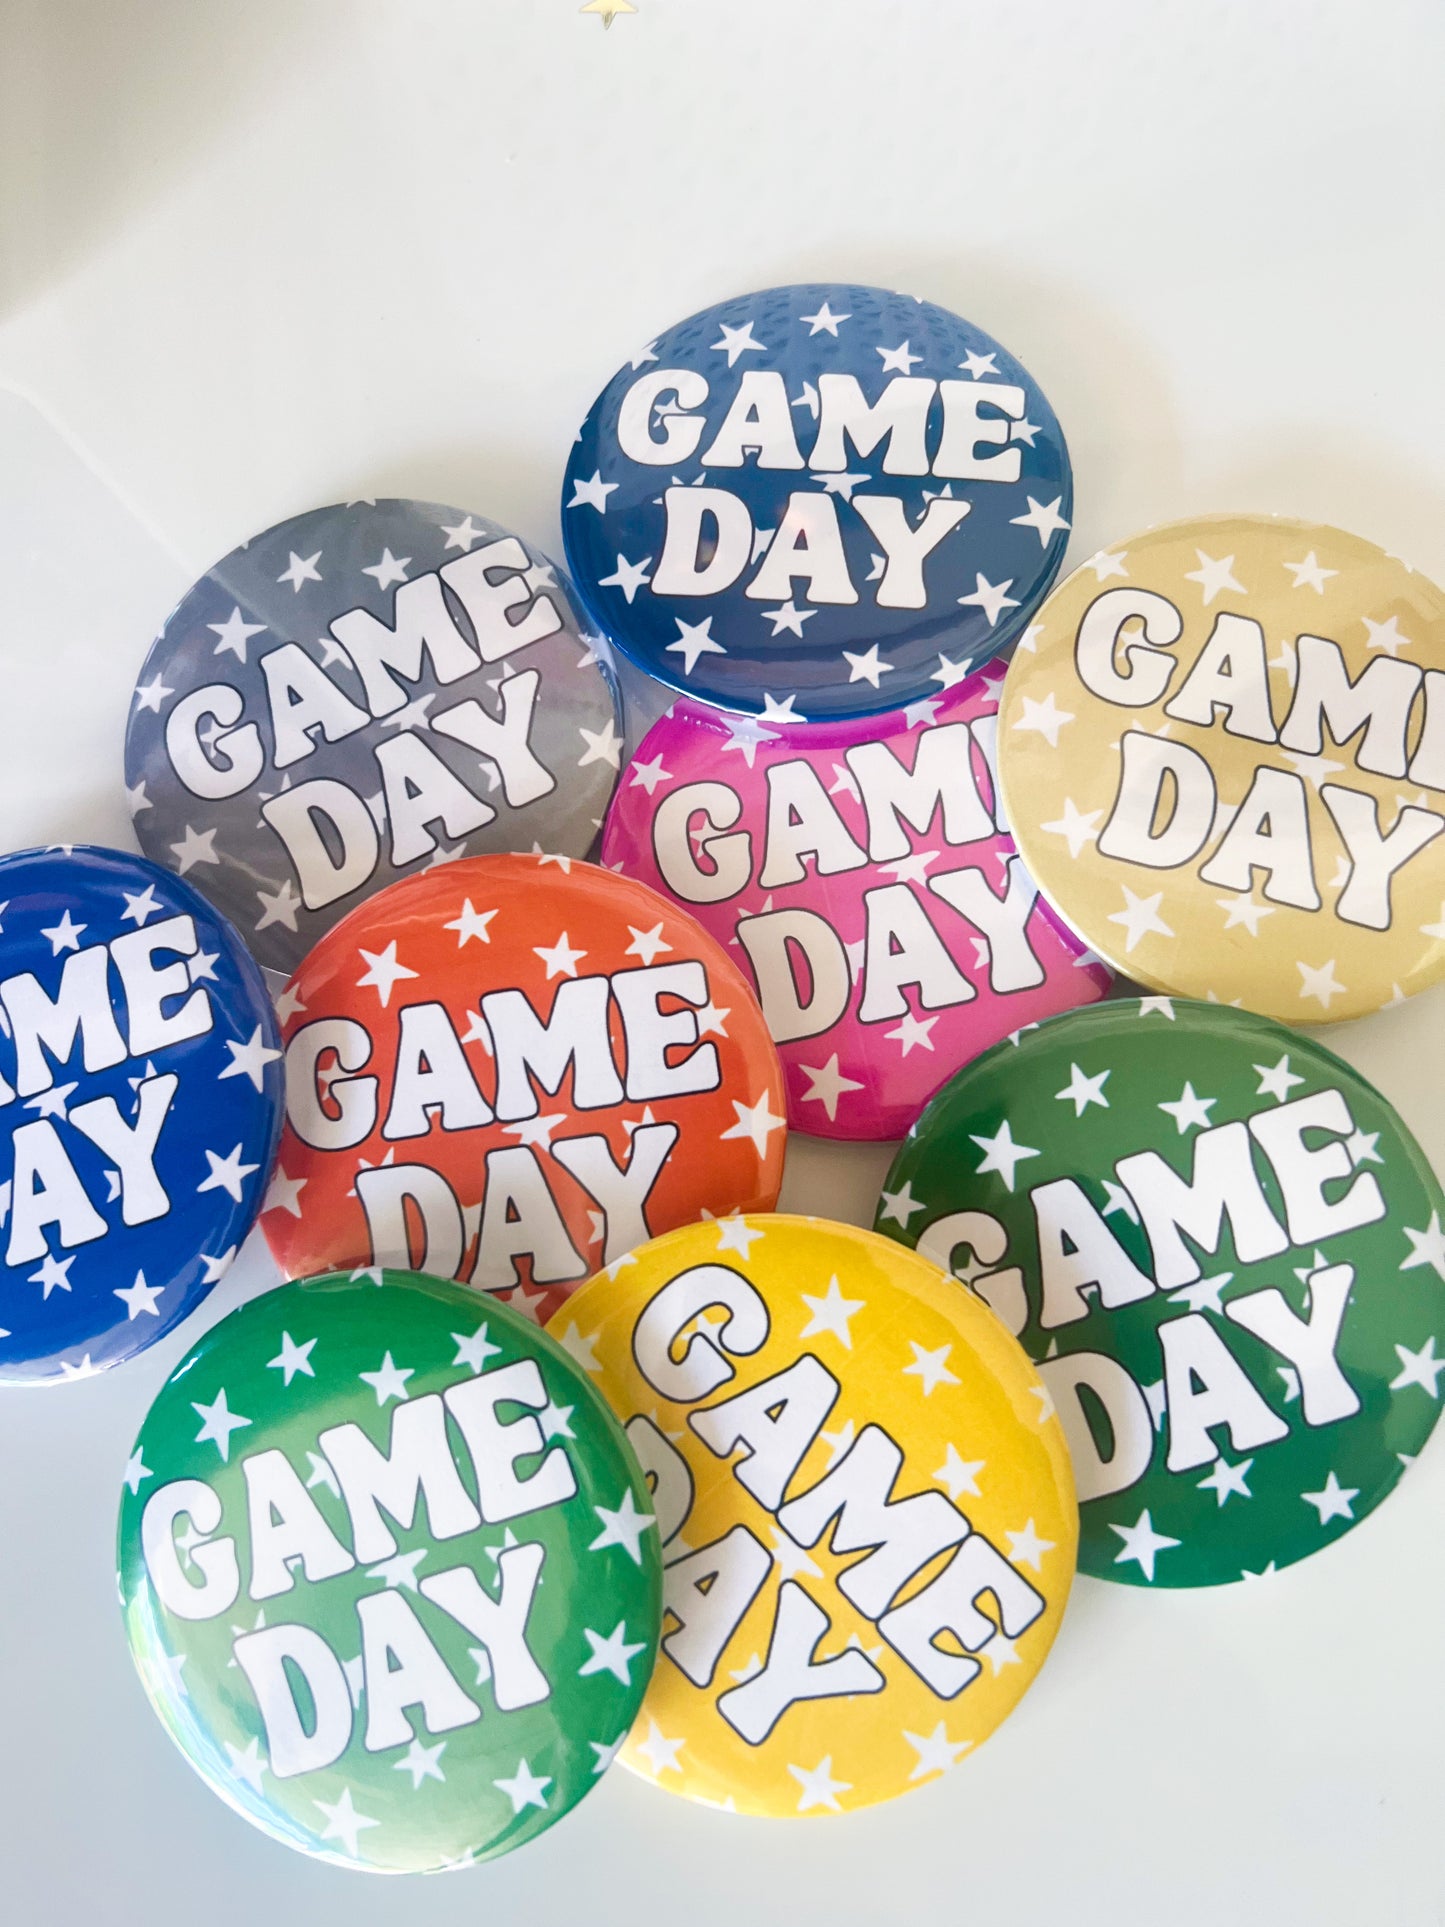 GAME DAY Buttons